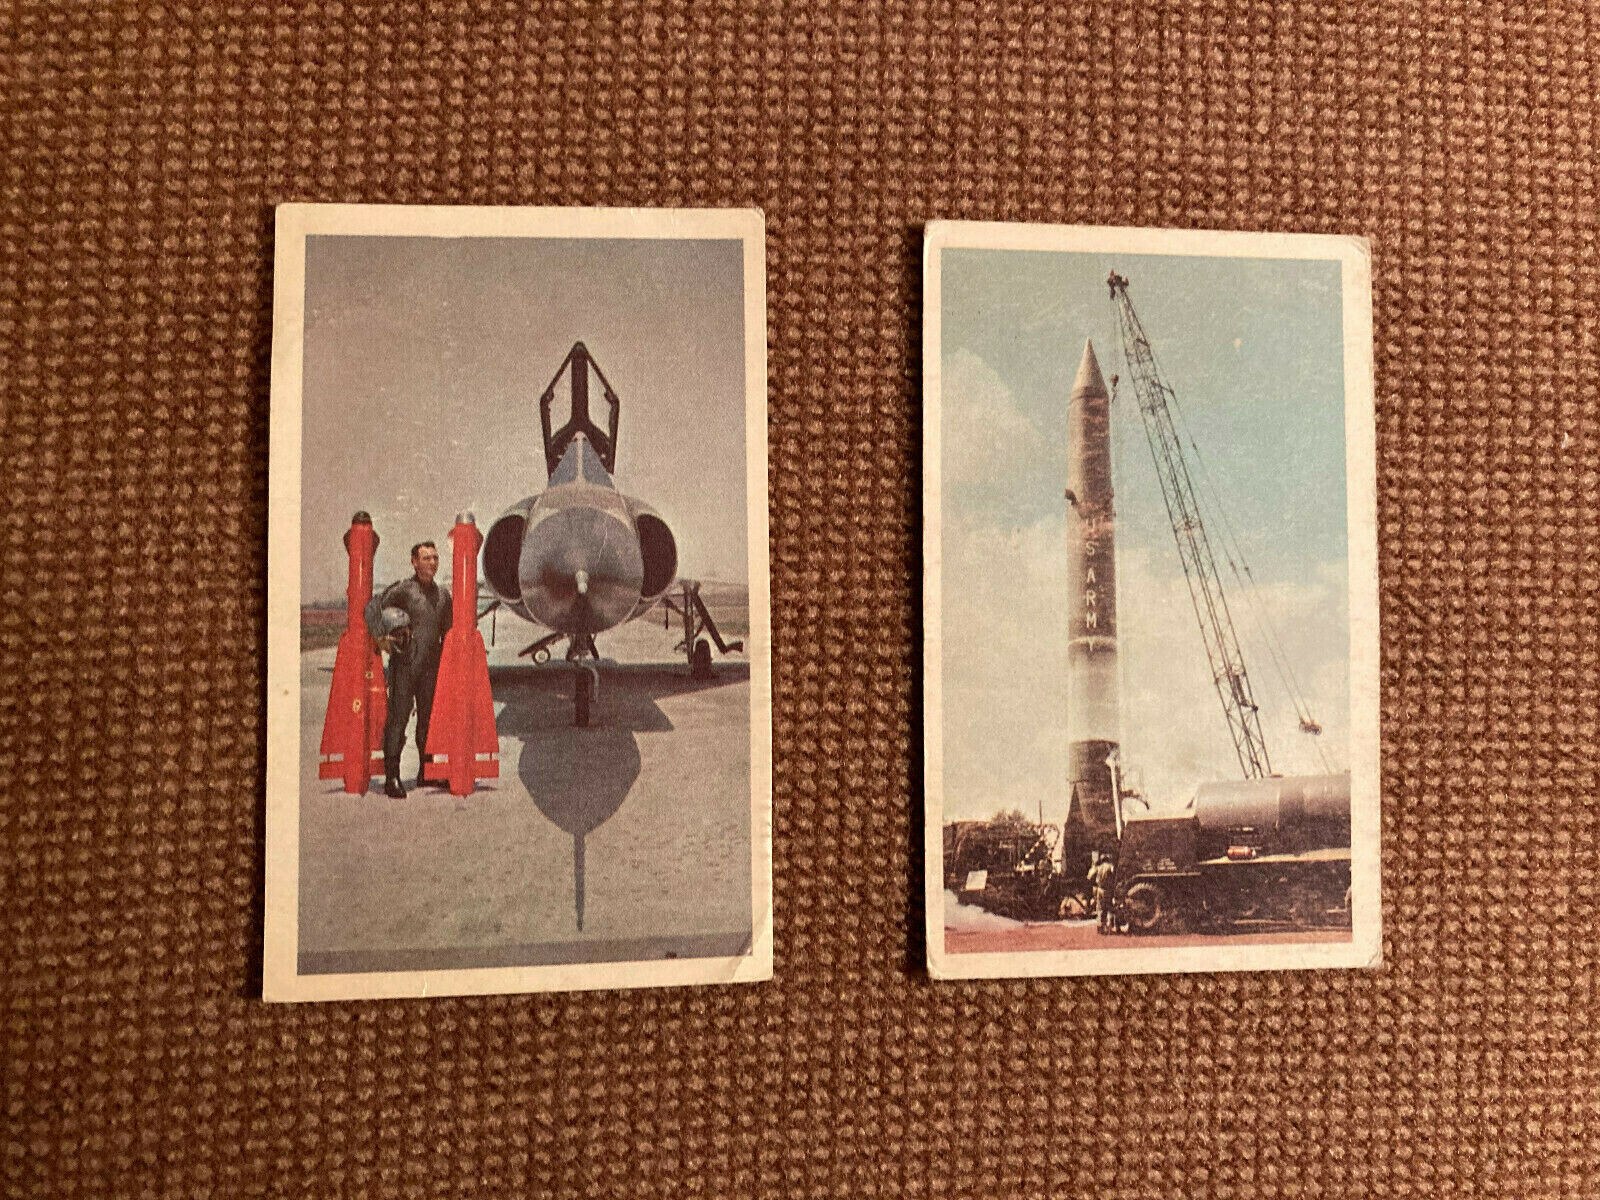 1959 Sicle Aircraft & Missile Canadian Vintage Trading Cards No. 2 & 16